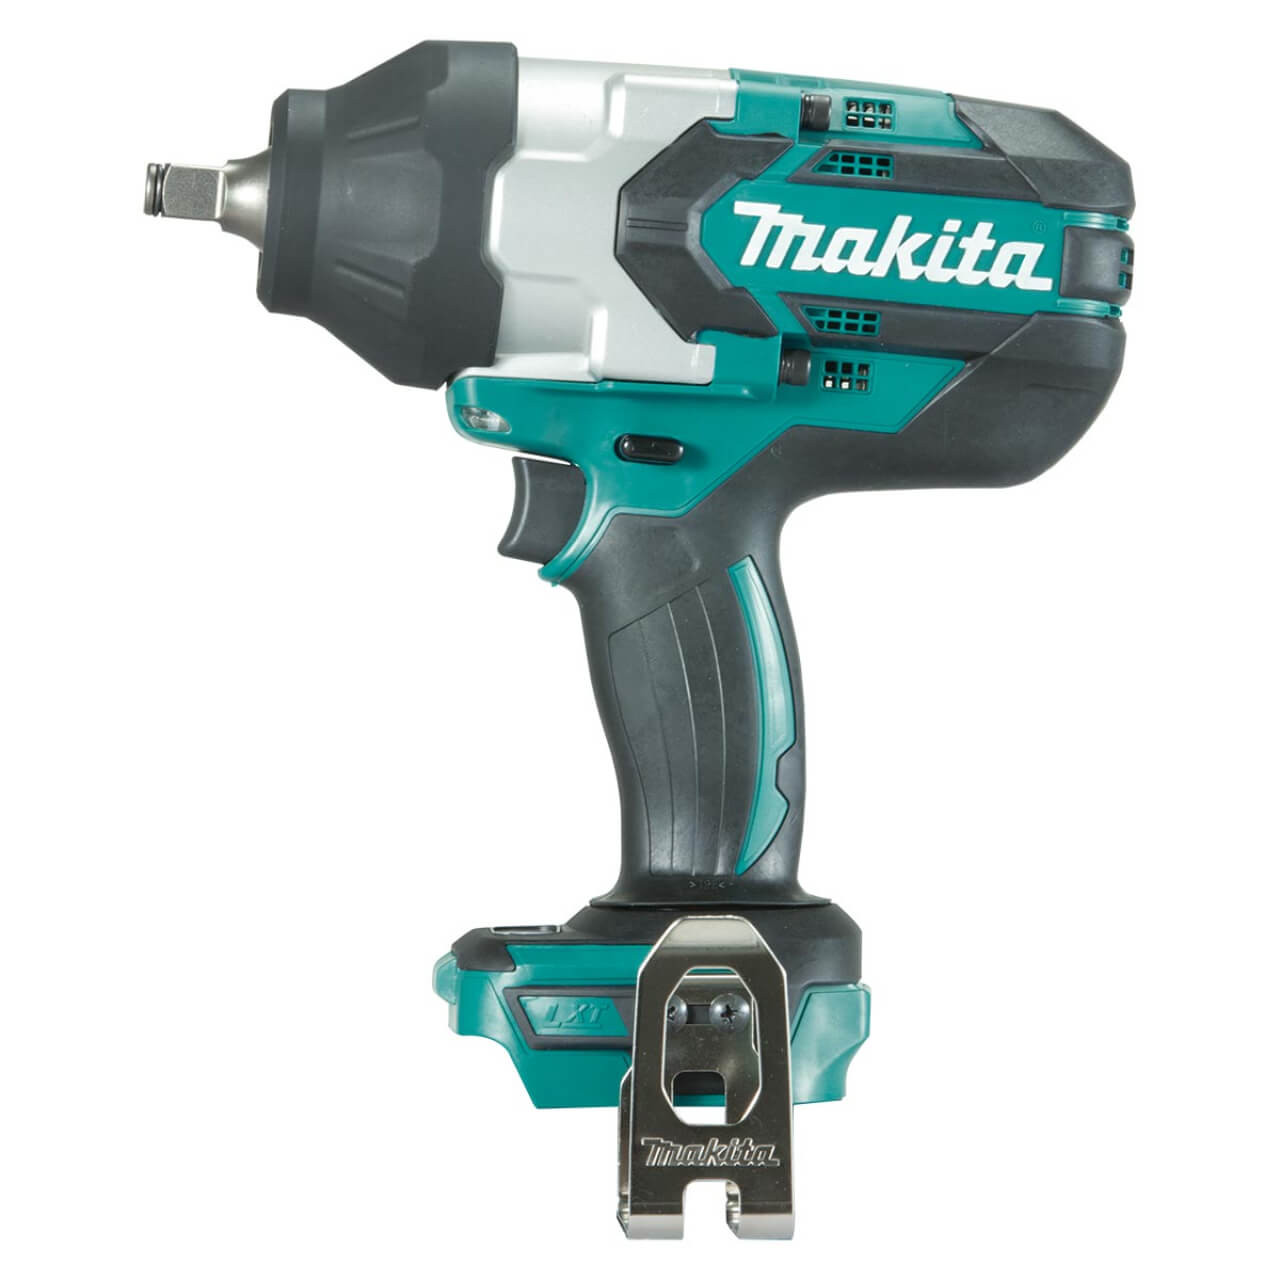 Makita DTW1002RTJ 18V BRUSHLESS 1/2” Impact Wrench Kit - Includes 2 x 5.0Ah Batteries. Rapid Charger & Carry Case